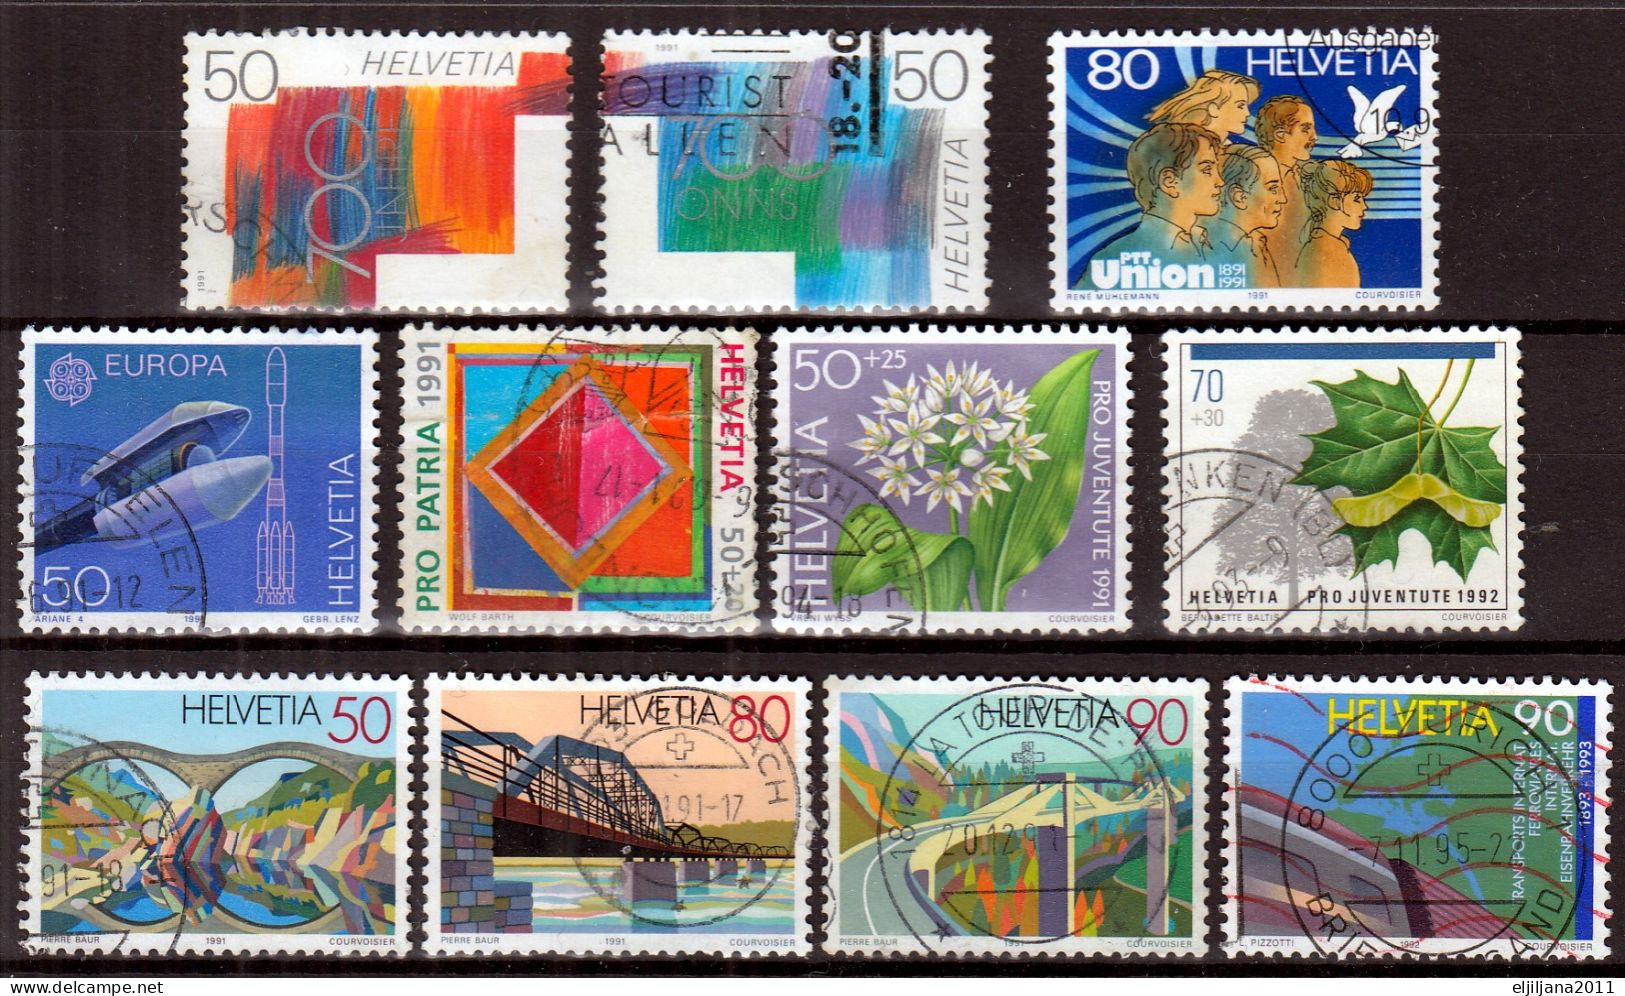 Switzerland / Helvetia / Schweiz / Suisse 1991 - 1992 ⁕ Nice Collection / Lot Of 23 Used Stamps - See All Scan - Usati